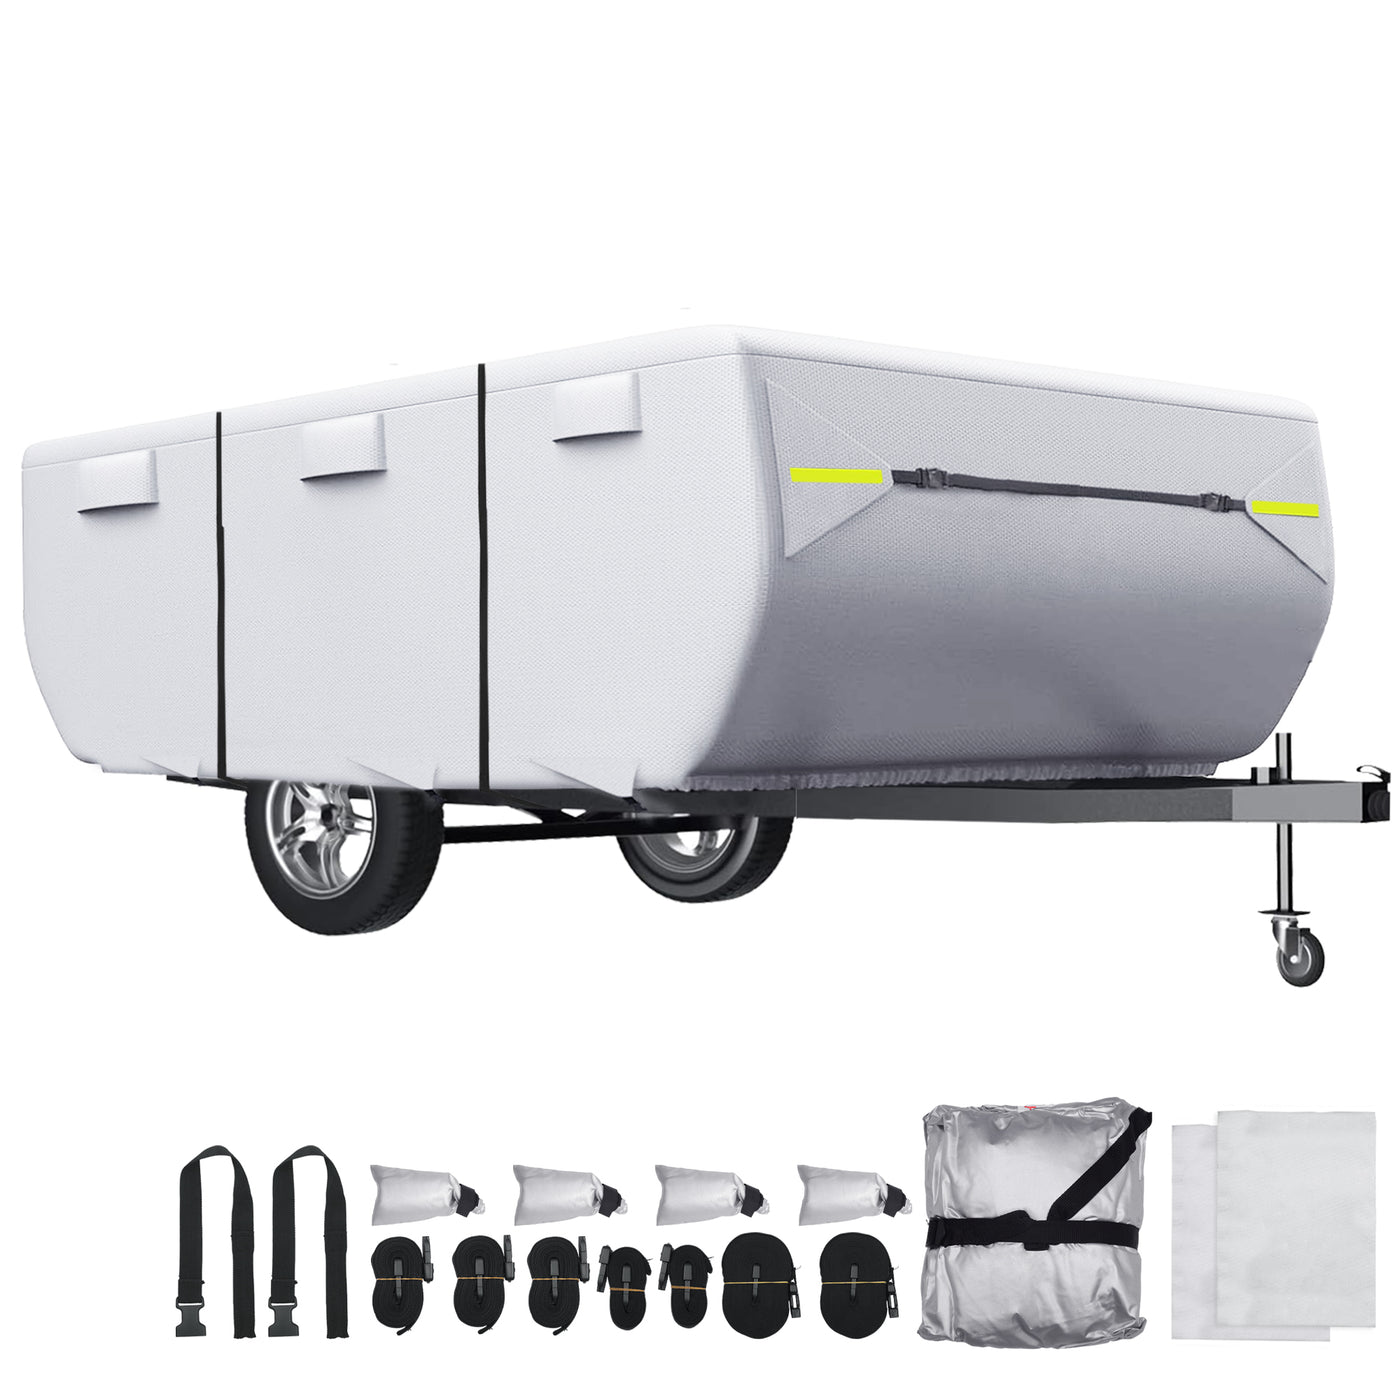 uxcell Uxcell Waterproof Pop-up Camper Trailer Cover Fits 10'-12' RV Cover Anti-UV with 3+2 Straps and Air Vents Protection for Motorhome Silver Tone